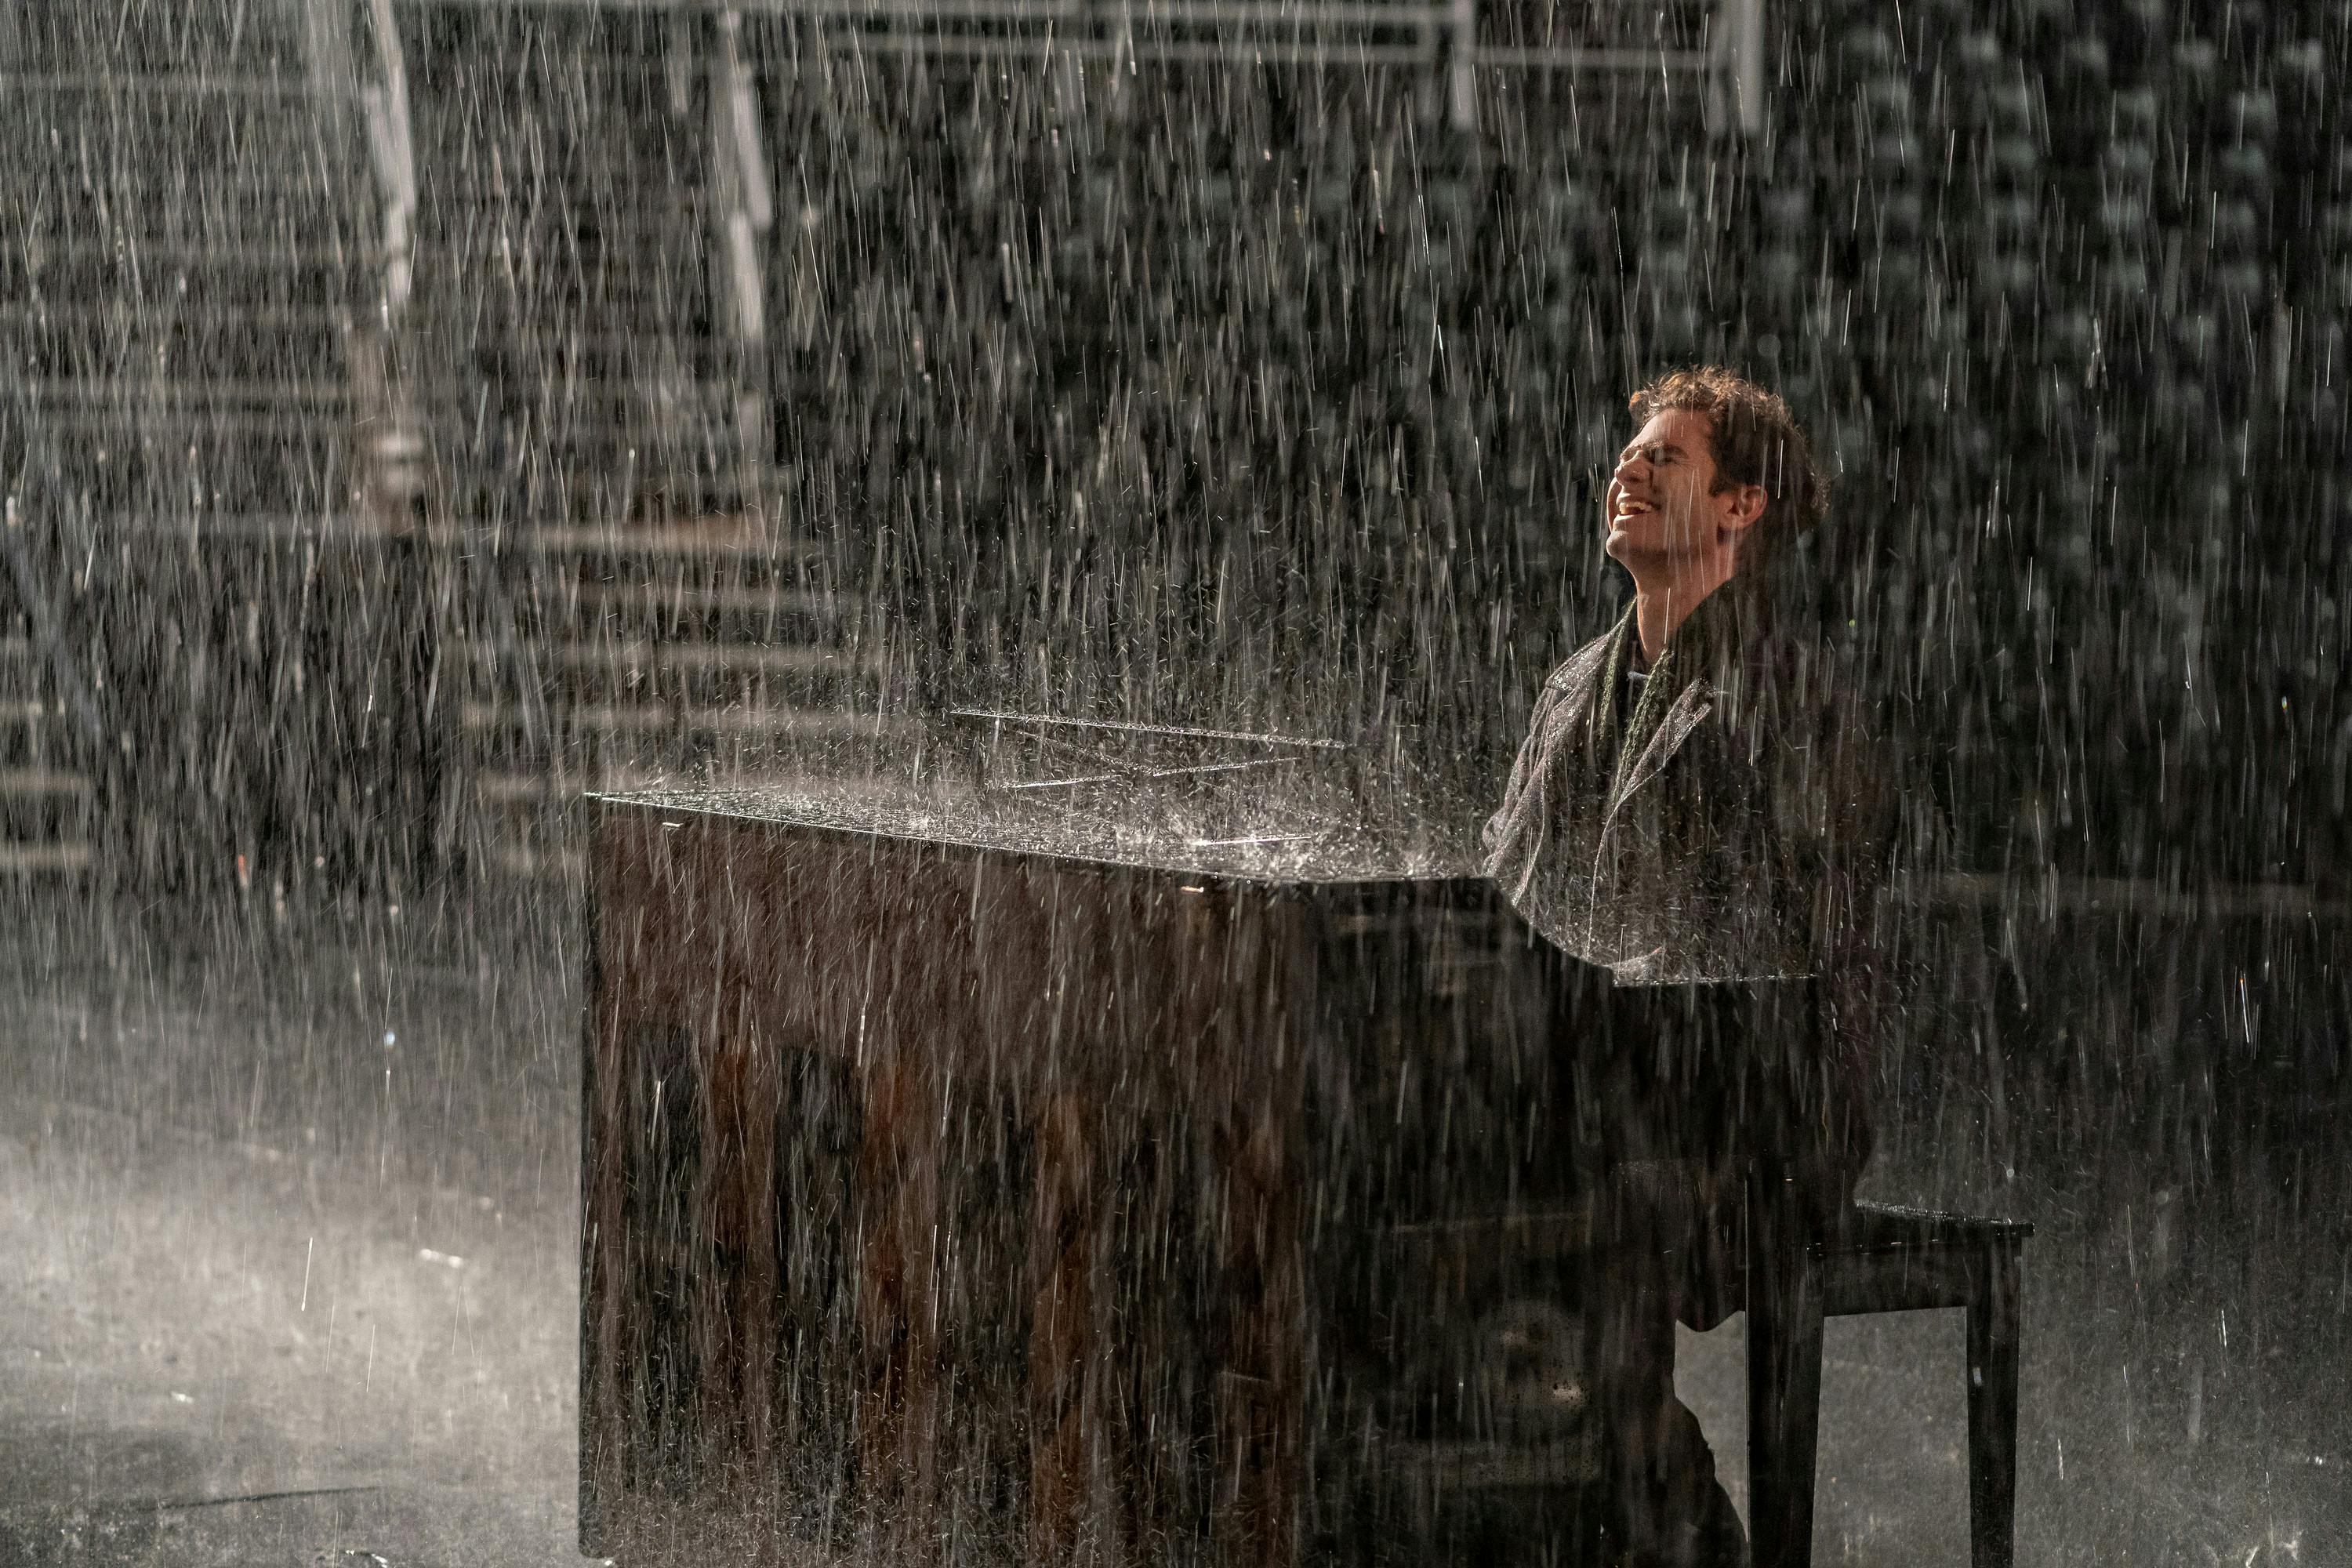 Andrew Garfield plays piano outside in a massive rainstorm. He wears dark clothing and smiles wide.